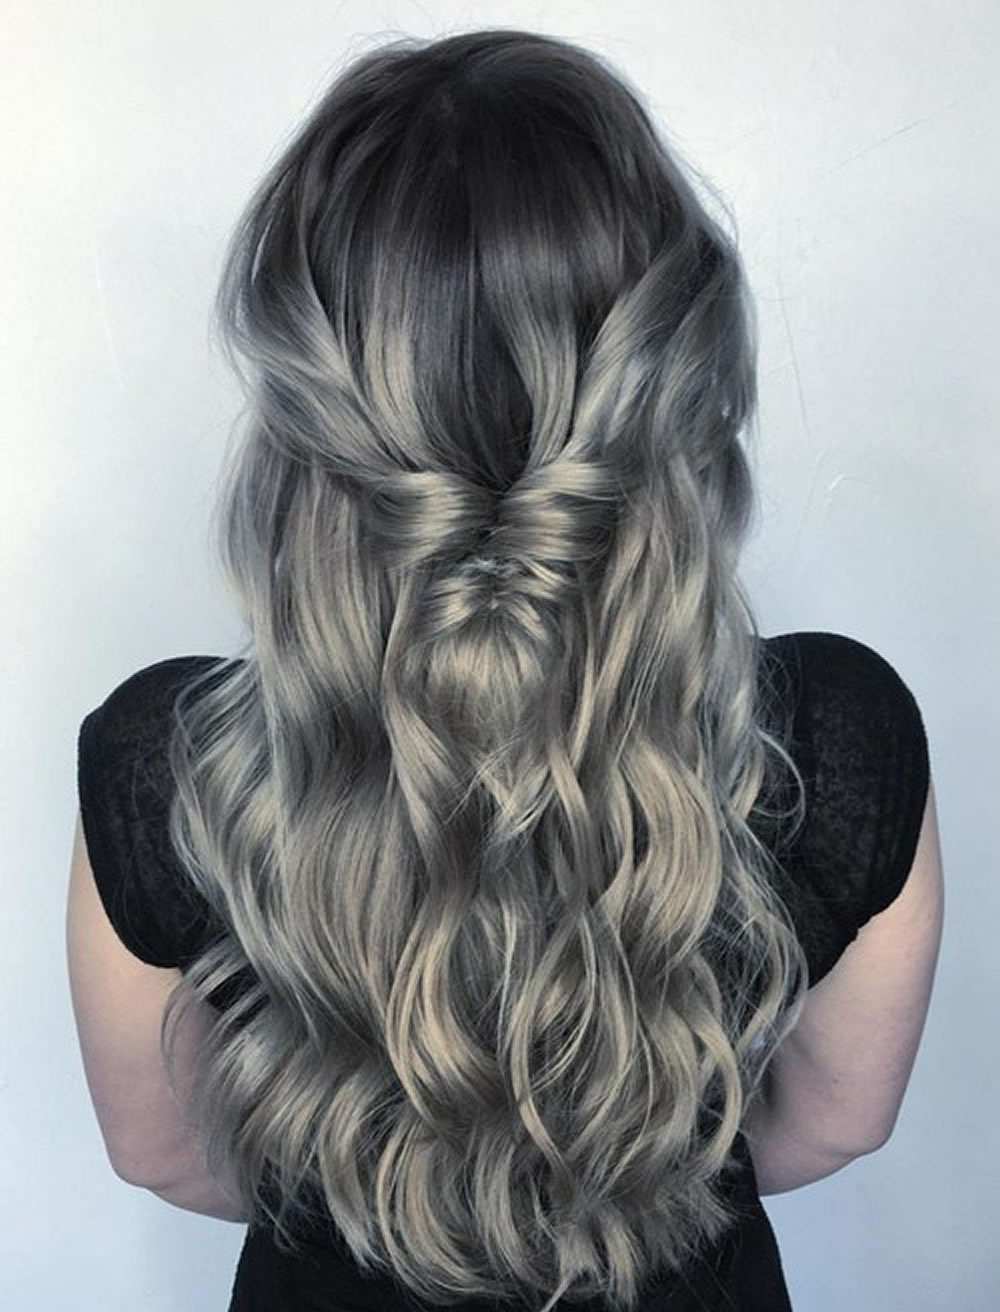 Silver hair dye dark hire Ombre Look Hairstyles quick idea